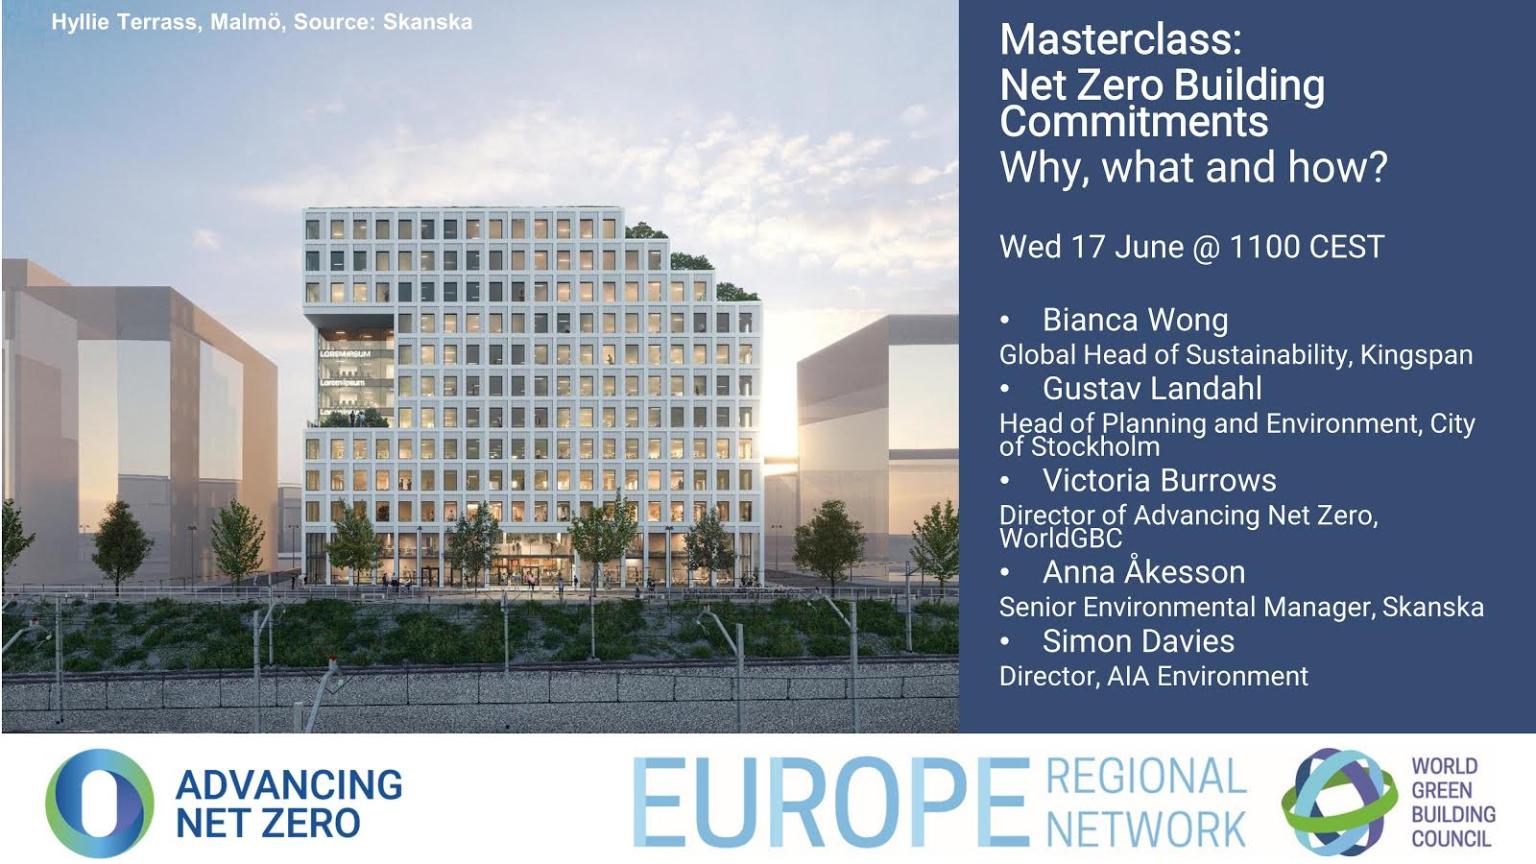 WorldGBC Europe: Masterclass on net zero buildings commitments - why, what and how?